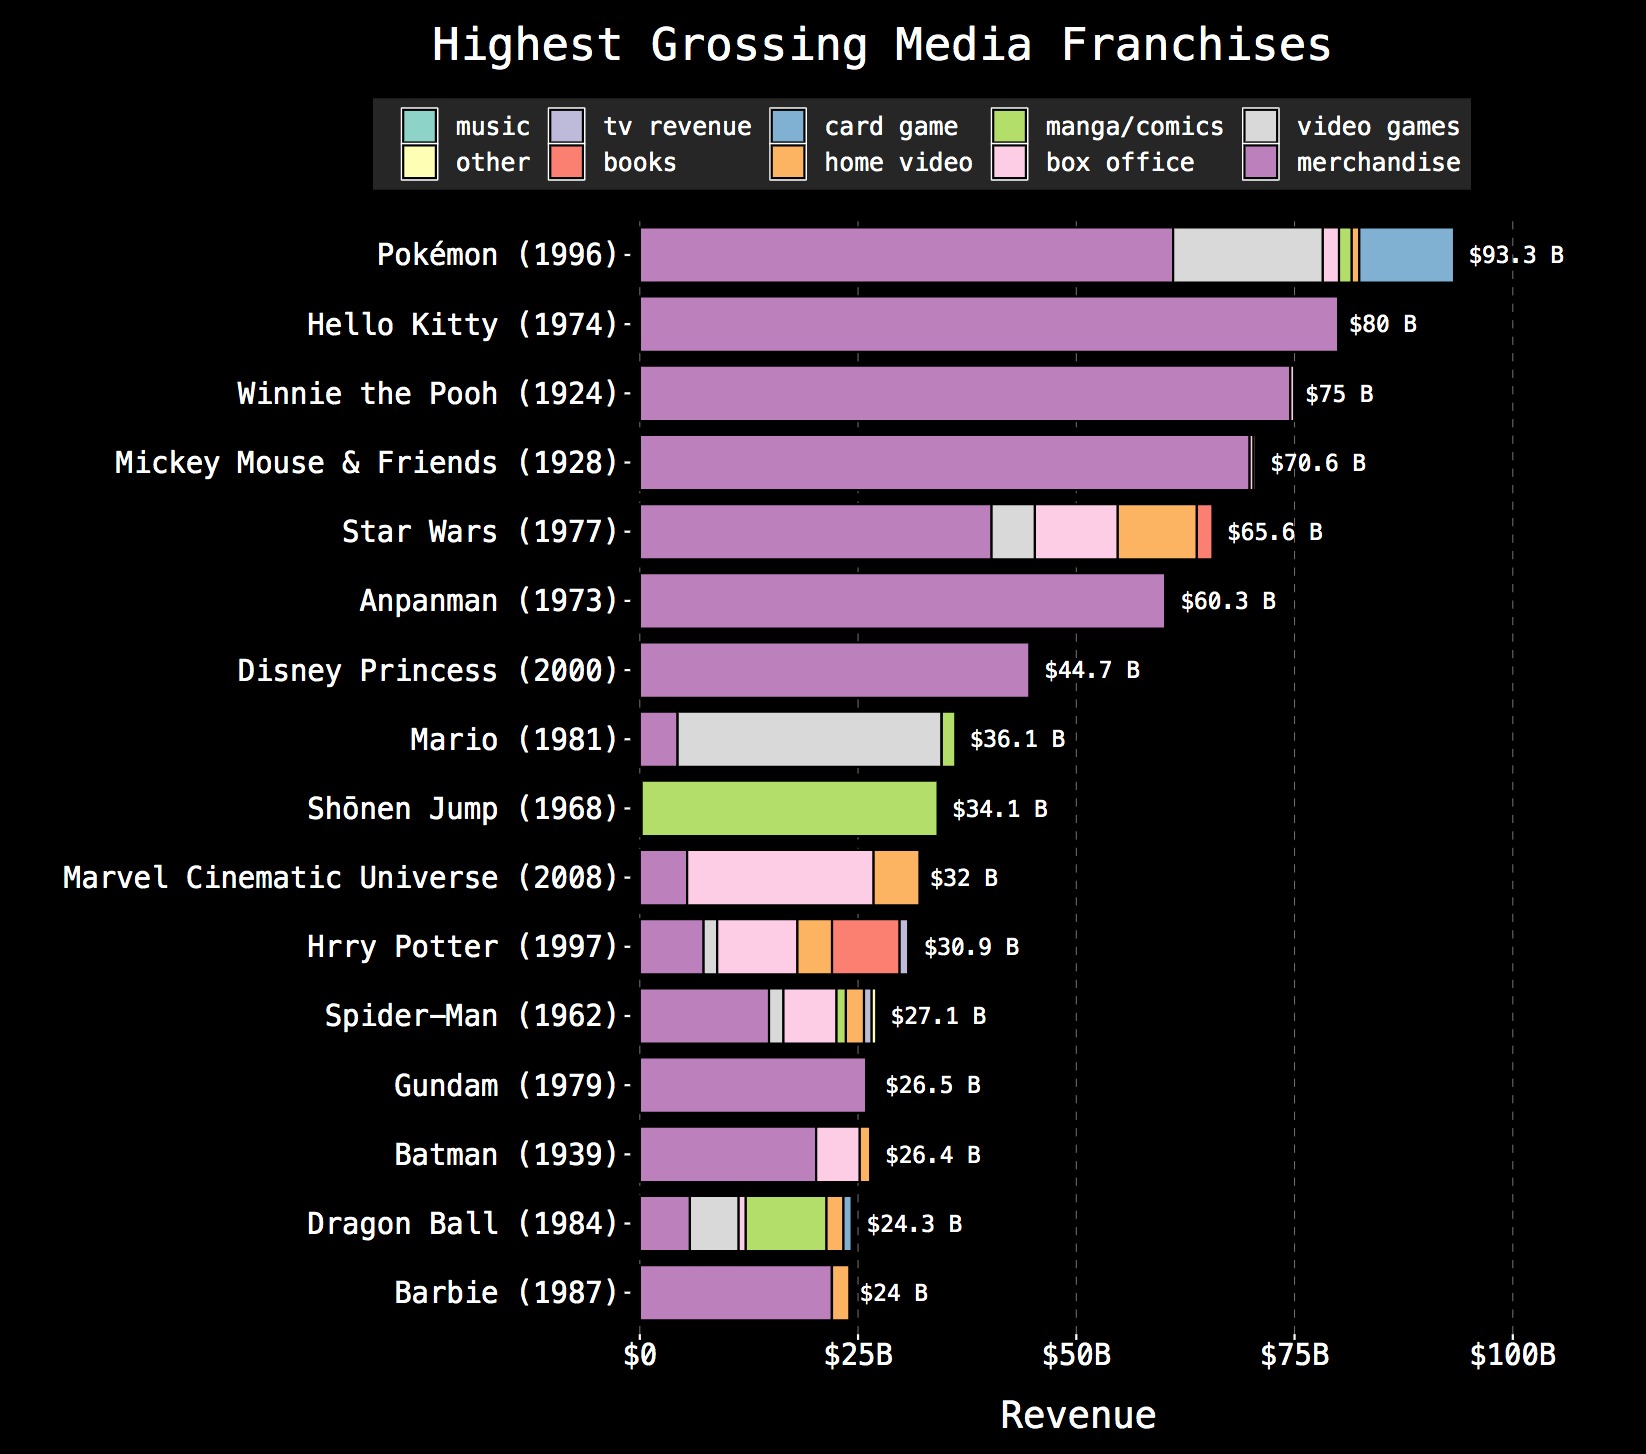 infographics and charts - highest grossing media franchises - Highest Grossing Media Franchises card game home video music other Pokmon Hello Kitty Winnie the Pooh Mickey Mouse & Friends Star Wars tv revenue books 1996 1974 1924 1928 1977 Anpanman 1973 Di